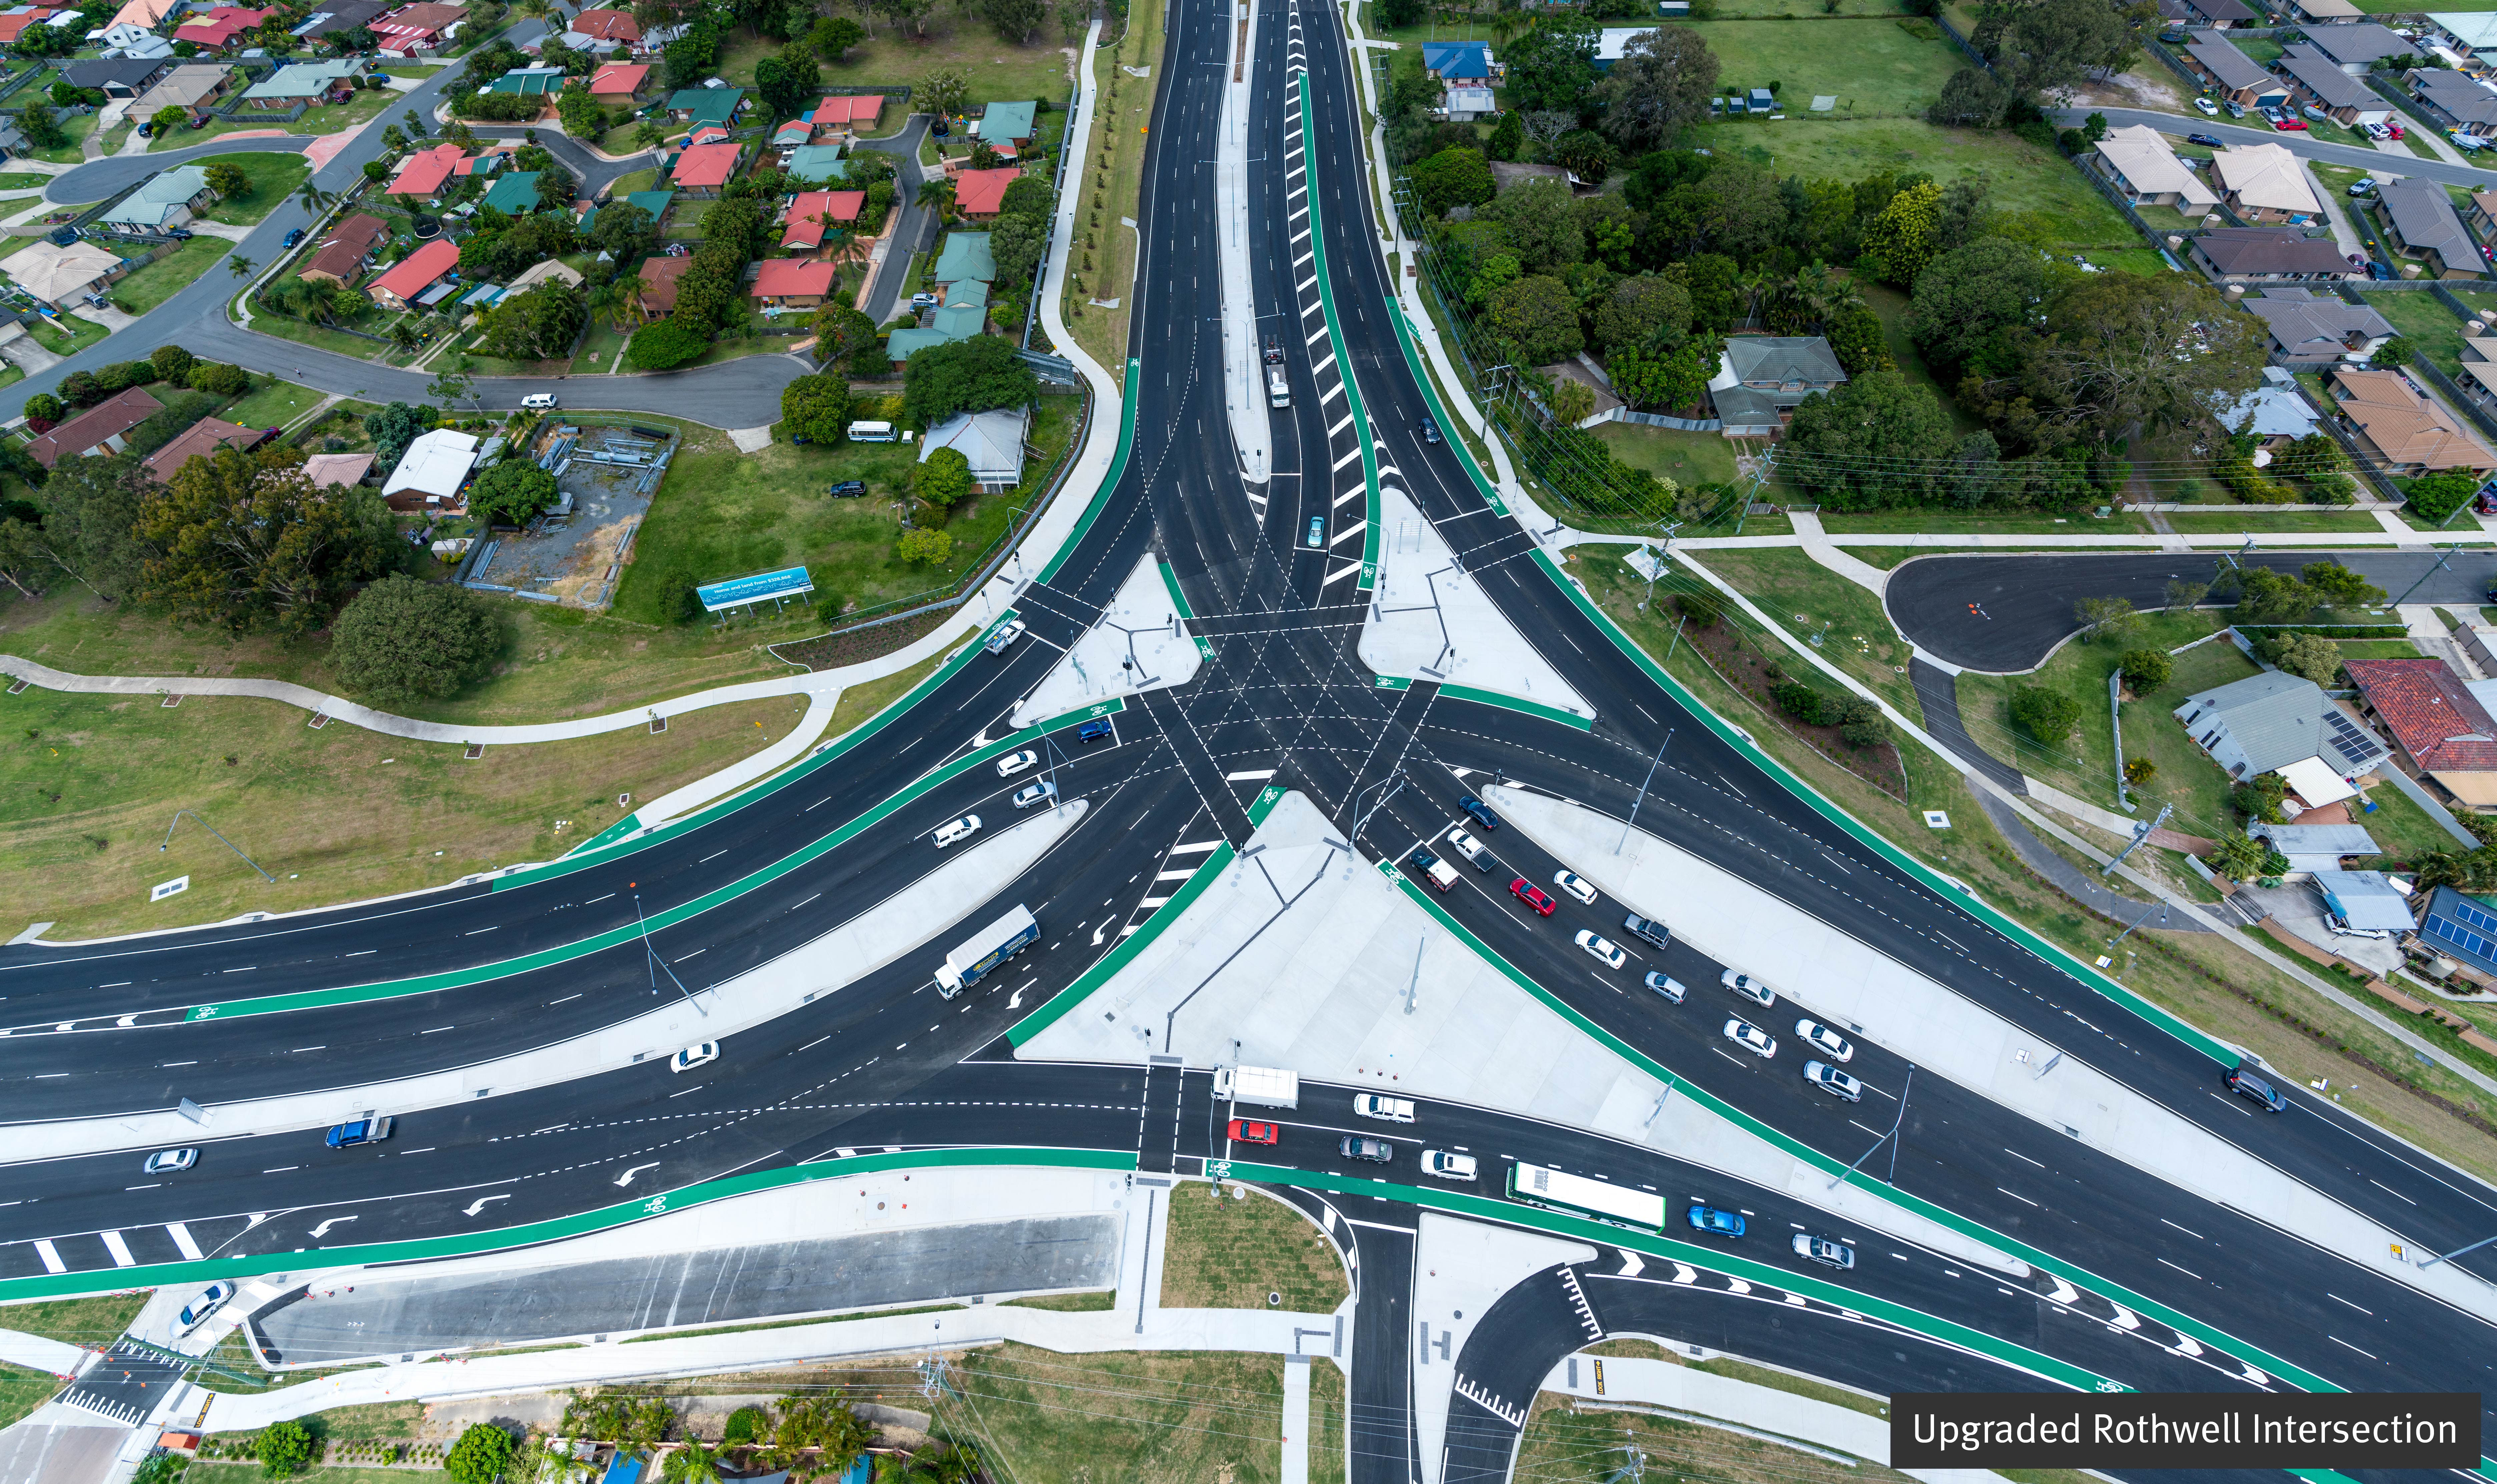 The upgraded Rothwell intersection